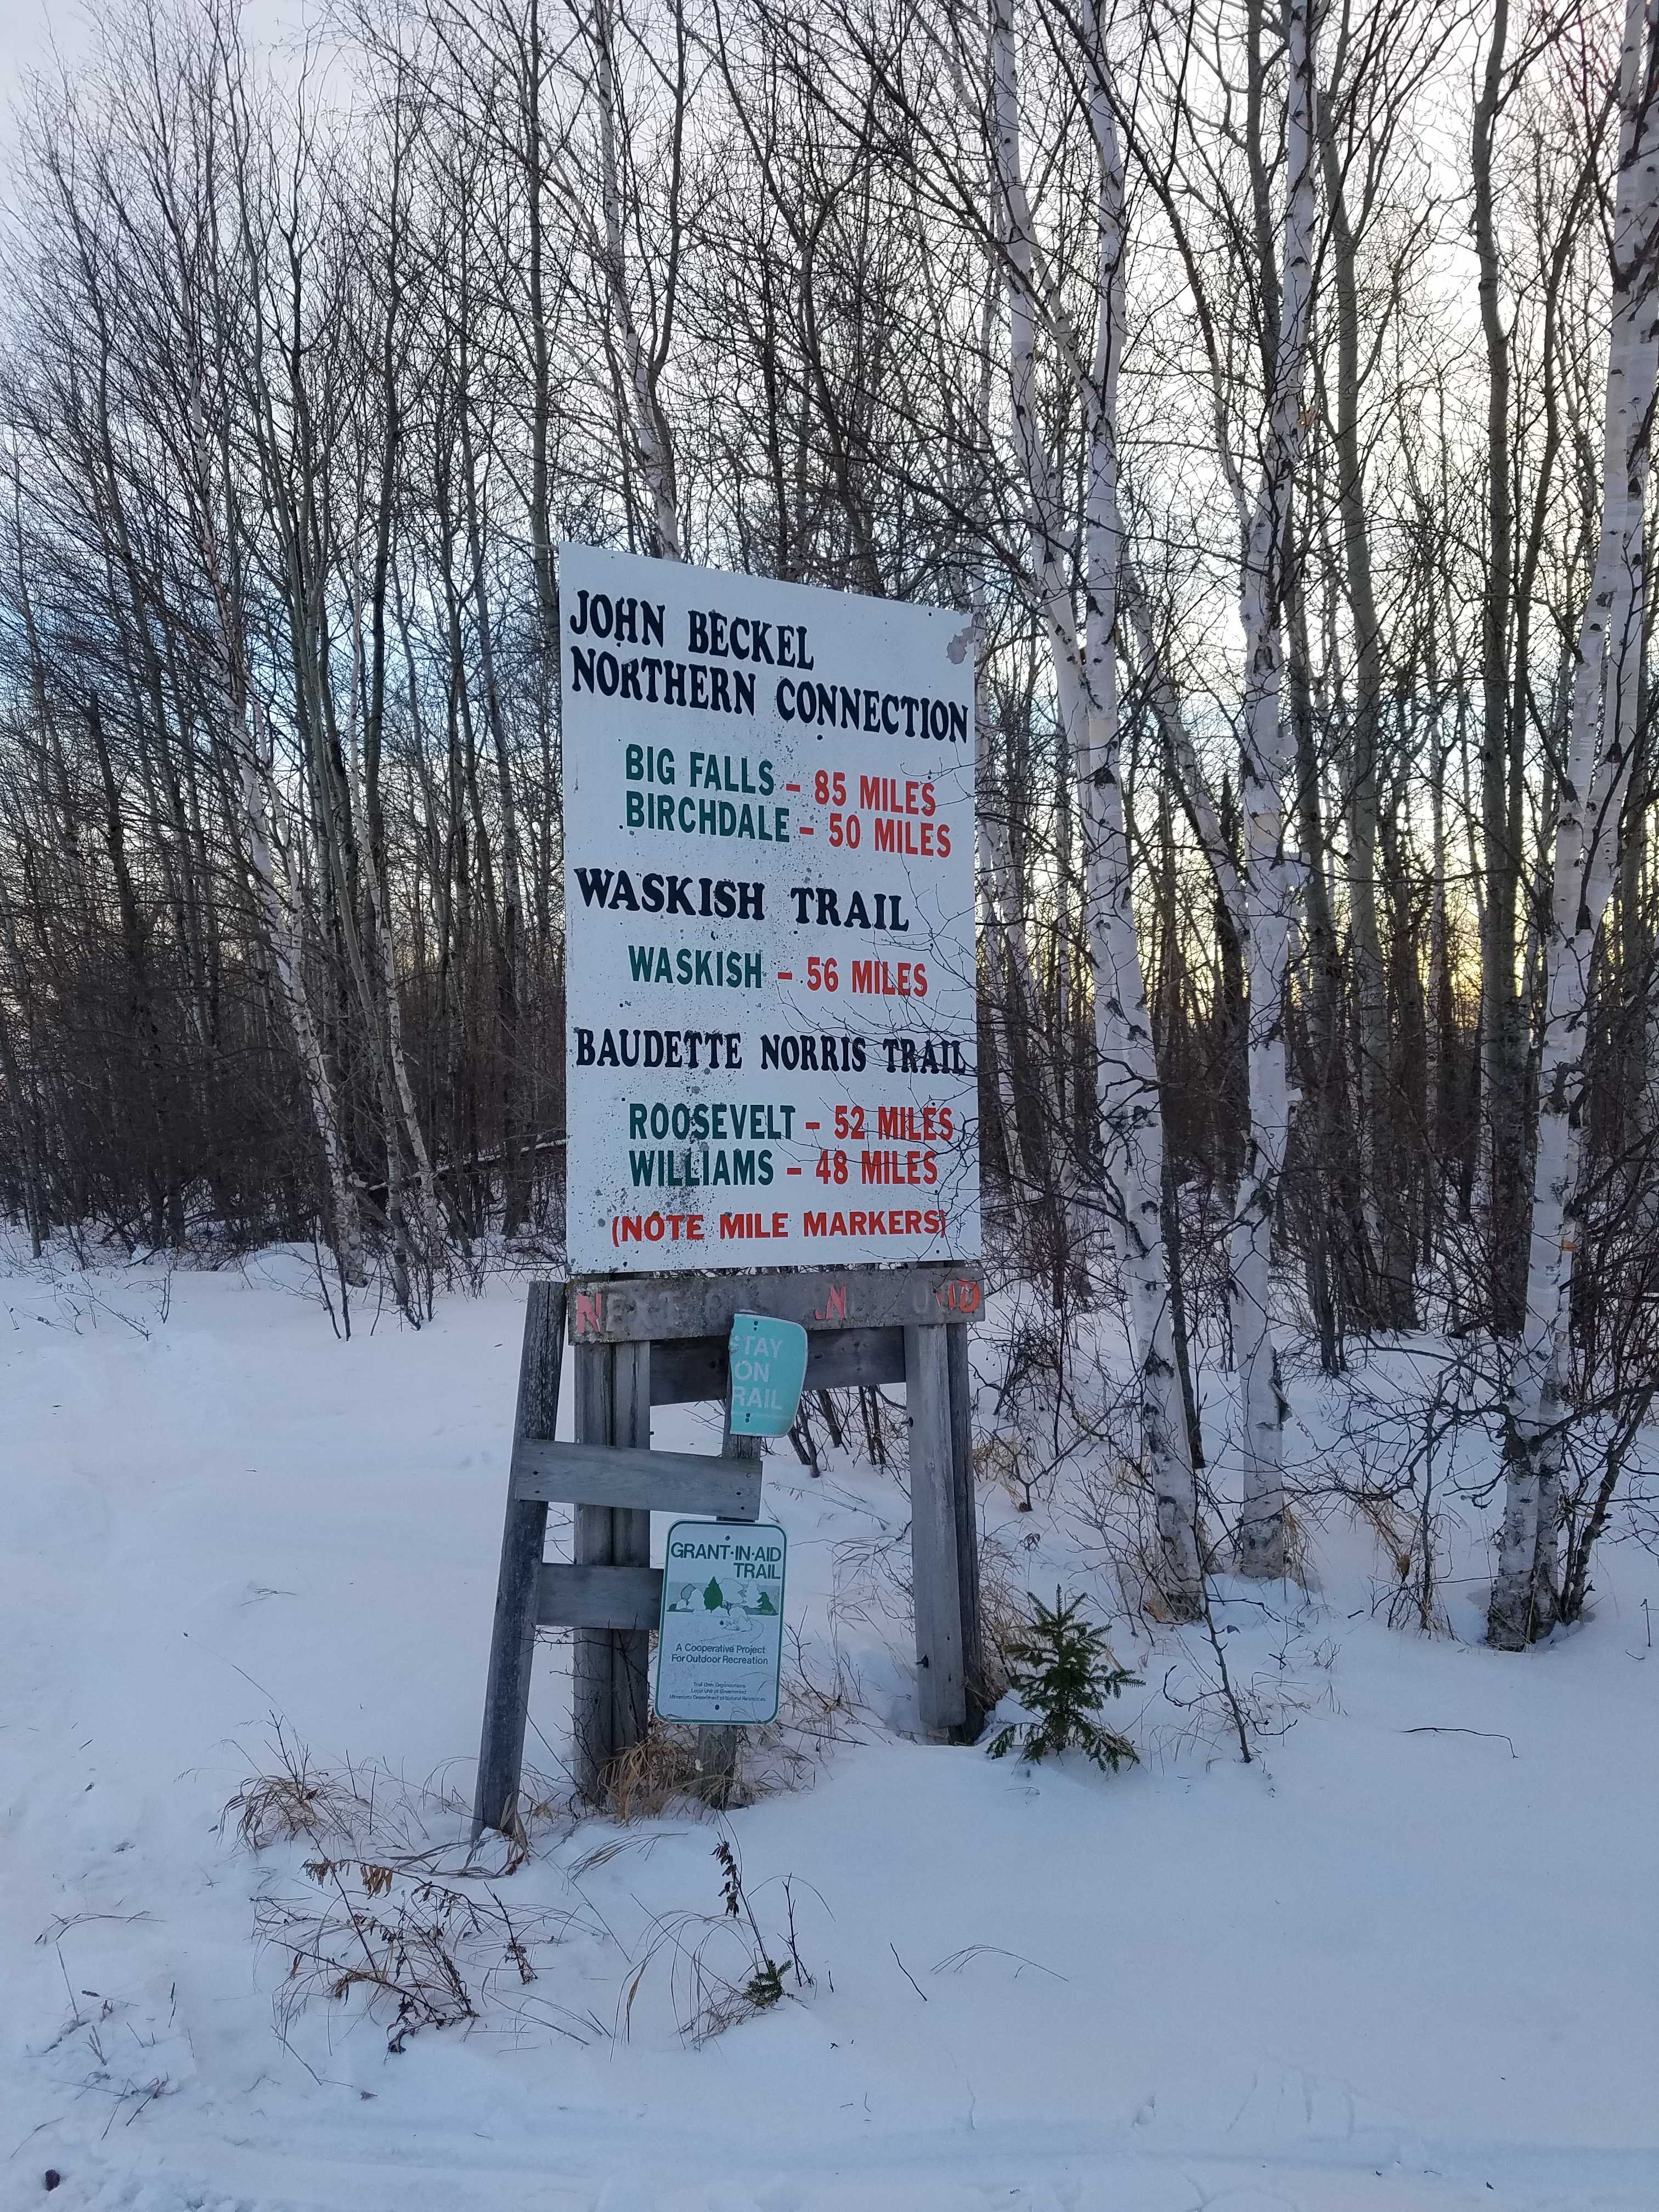 Lake of the woods snowmobile trail sign